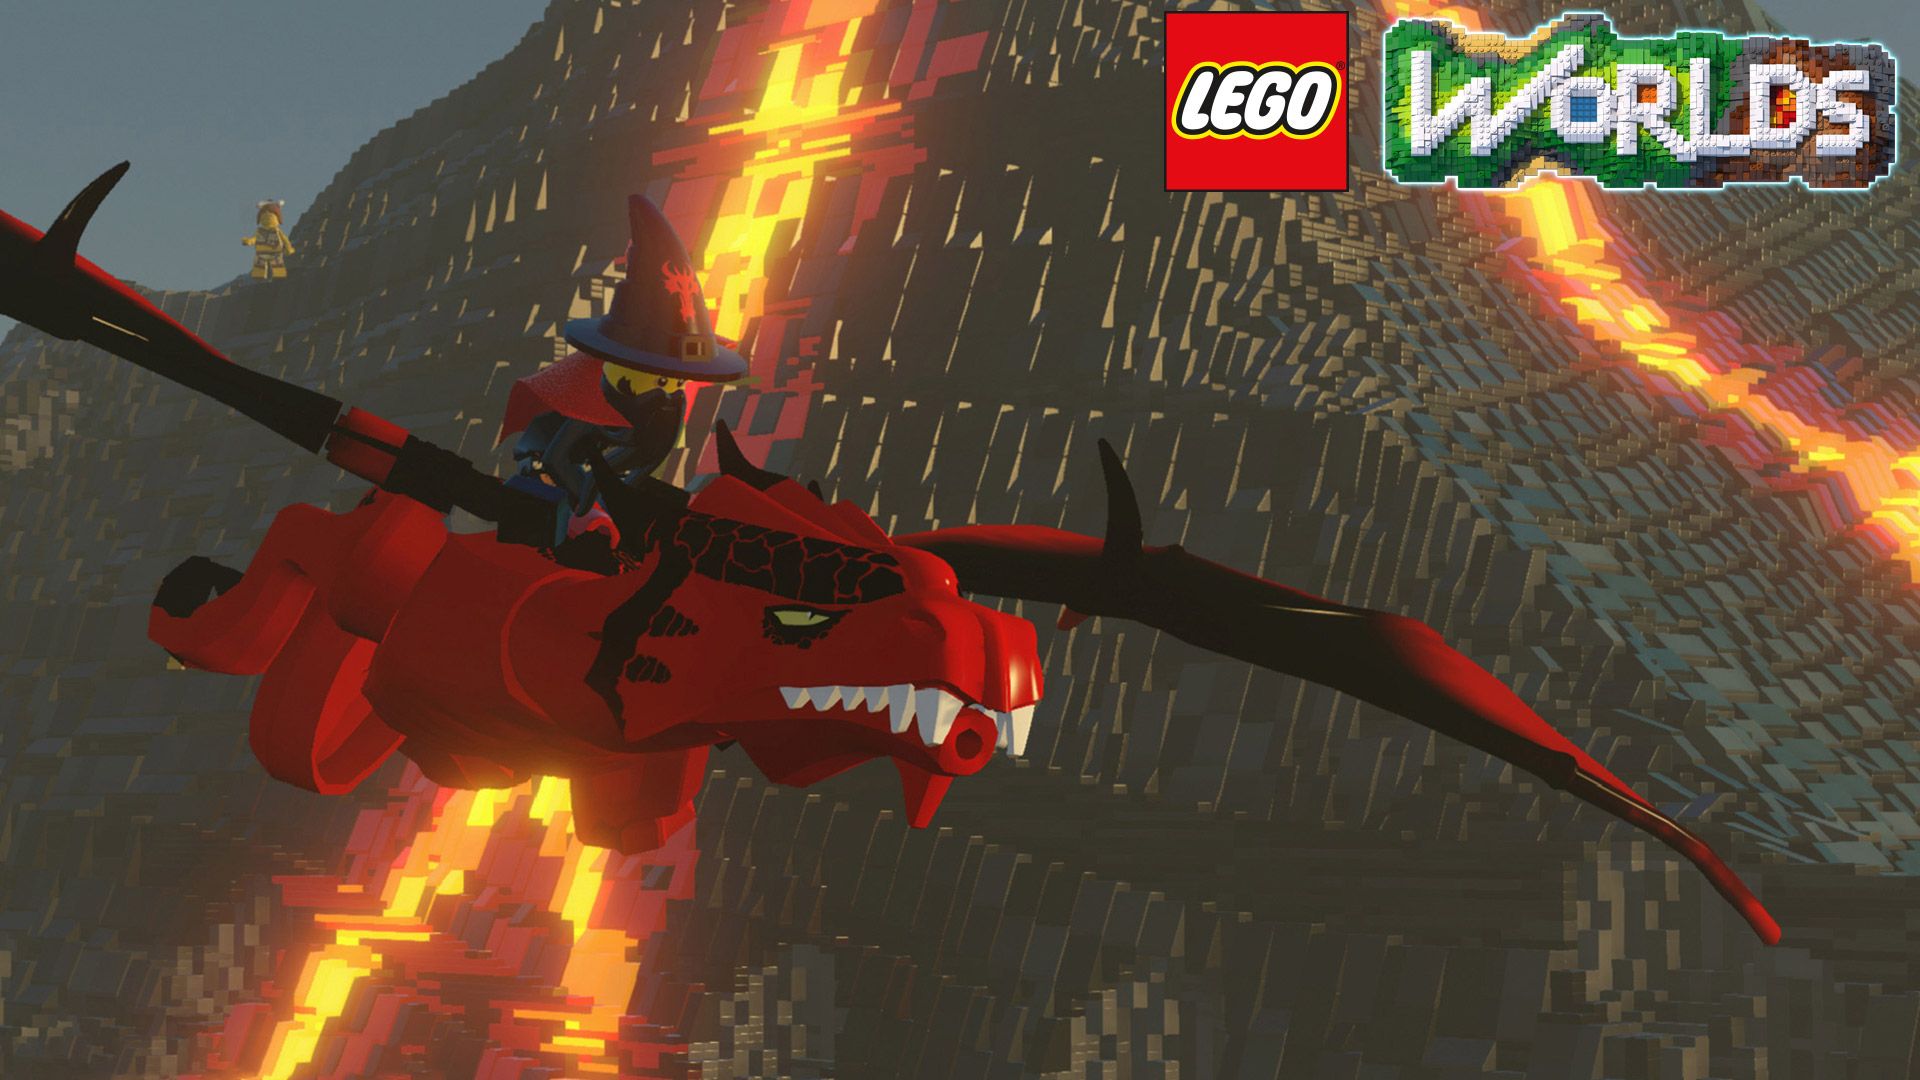 Free Lego Worlds Wallpaper in 1920x1080